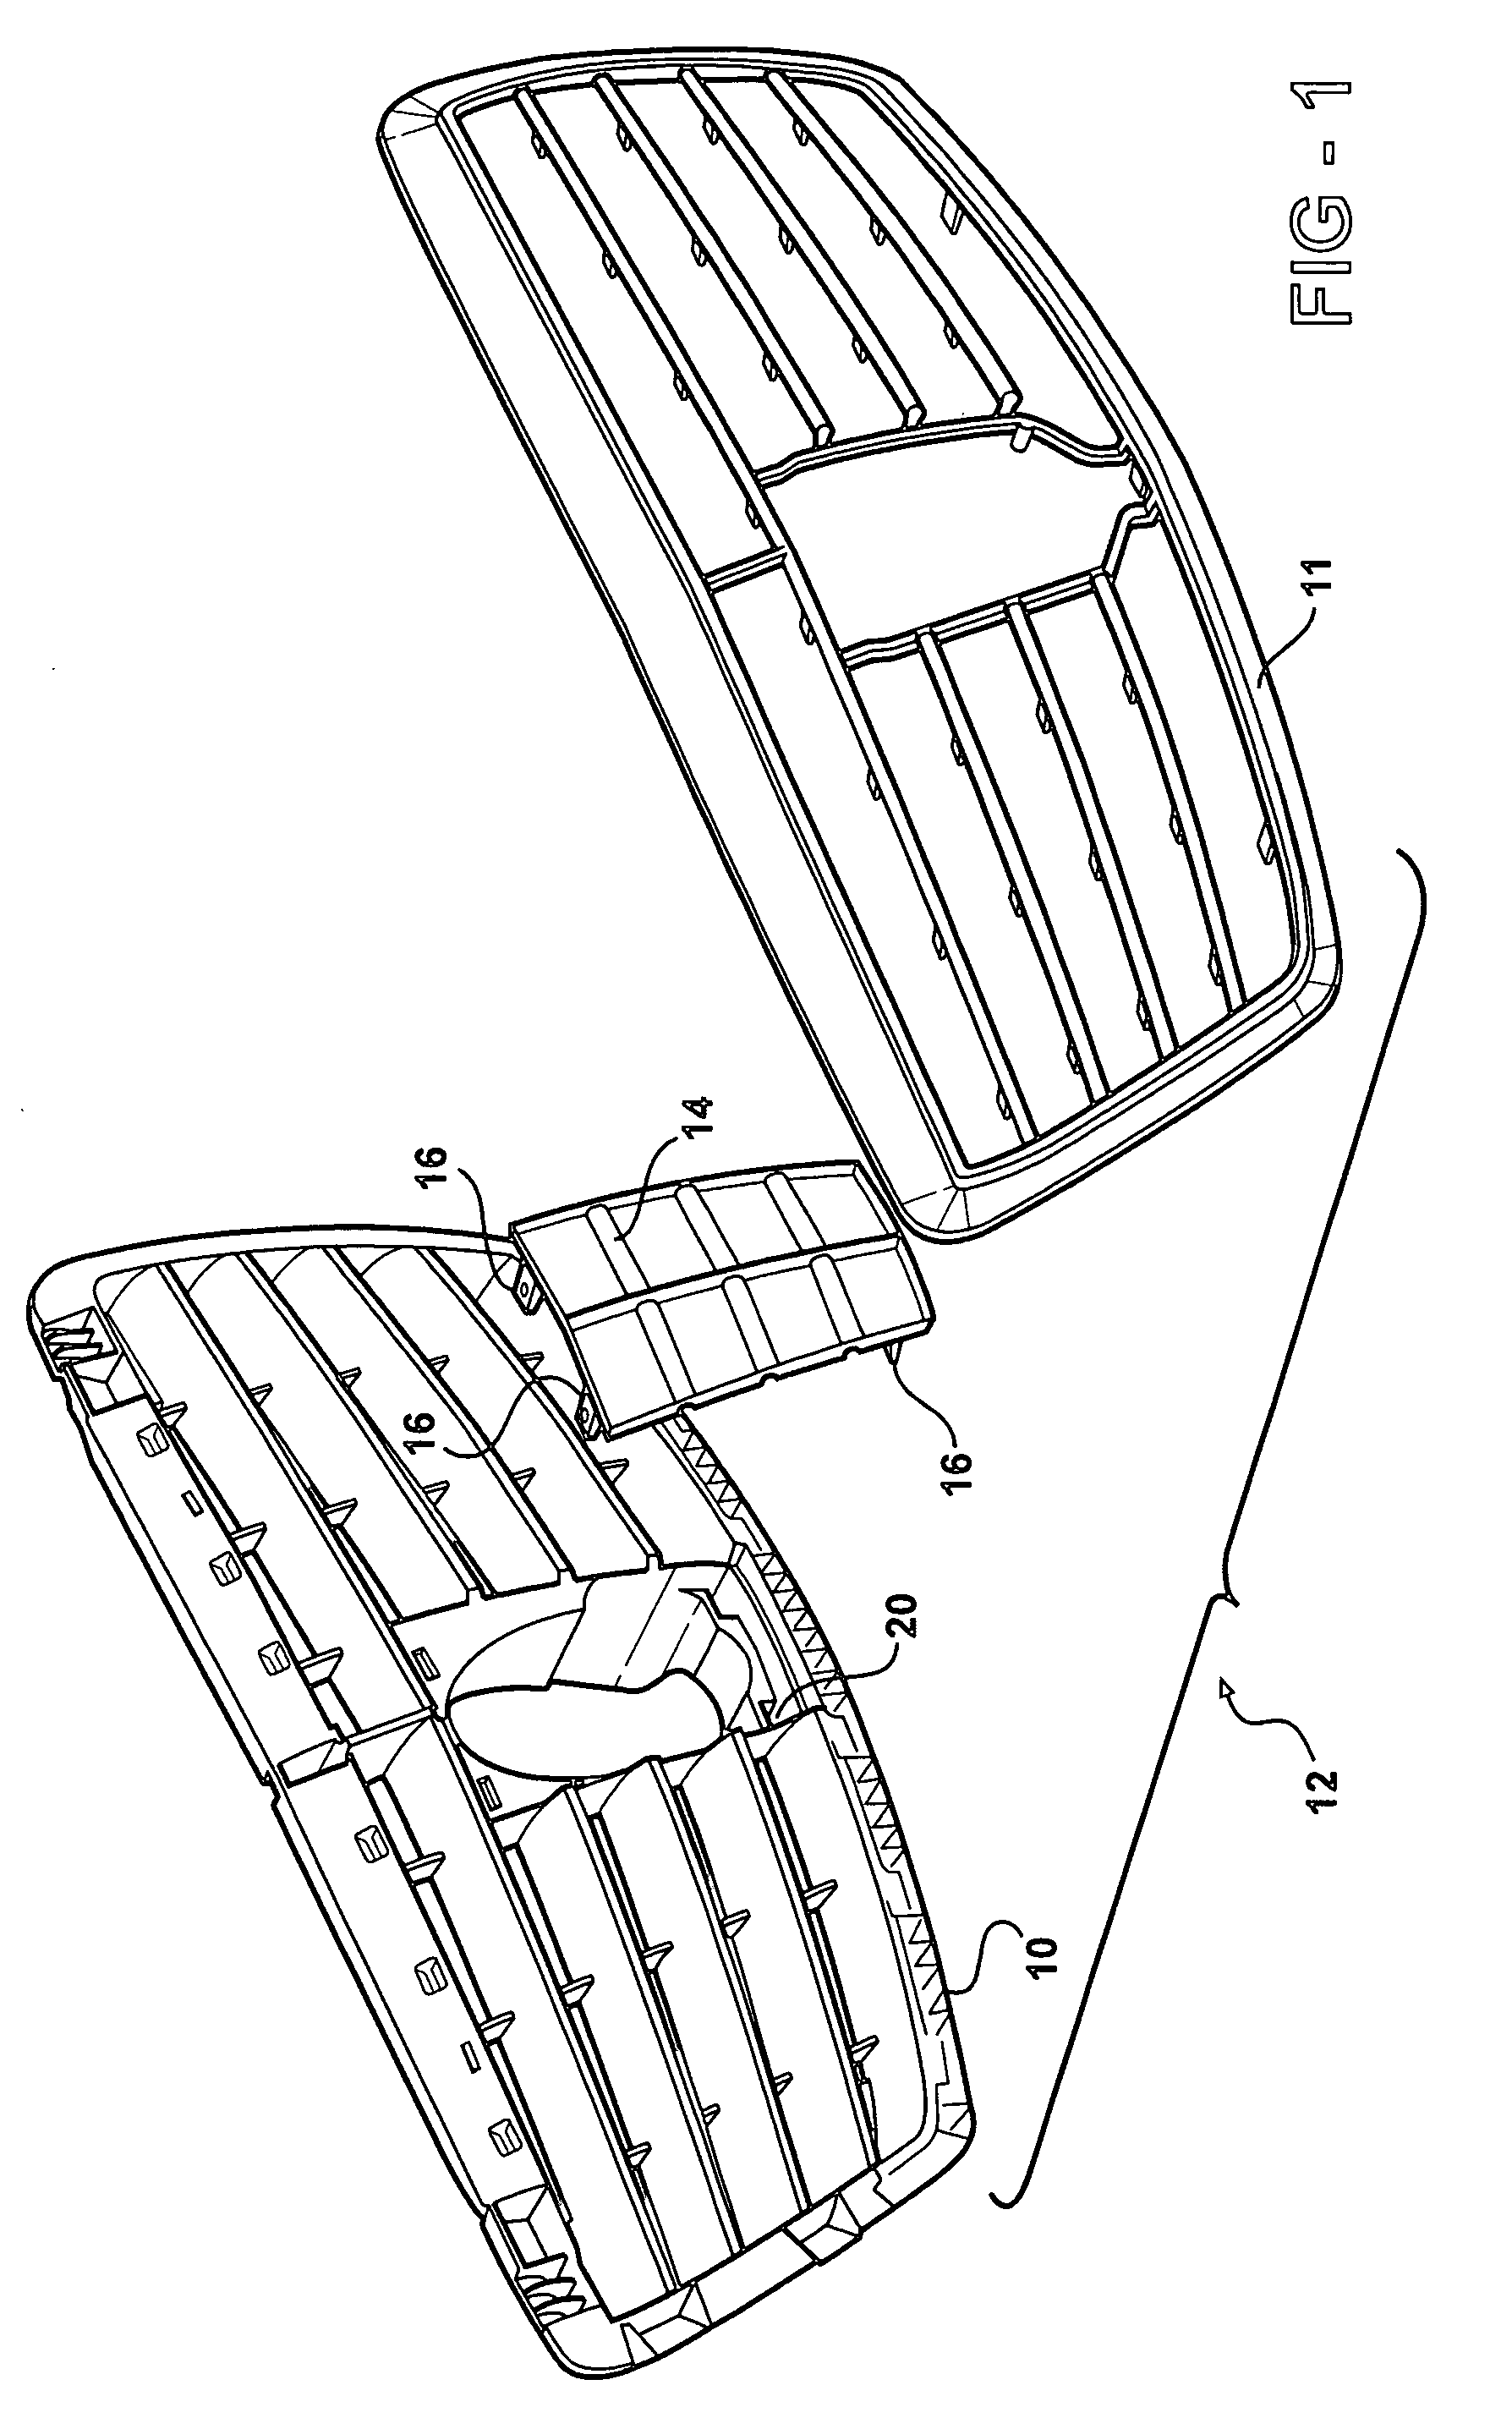 Method of fixing components